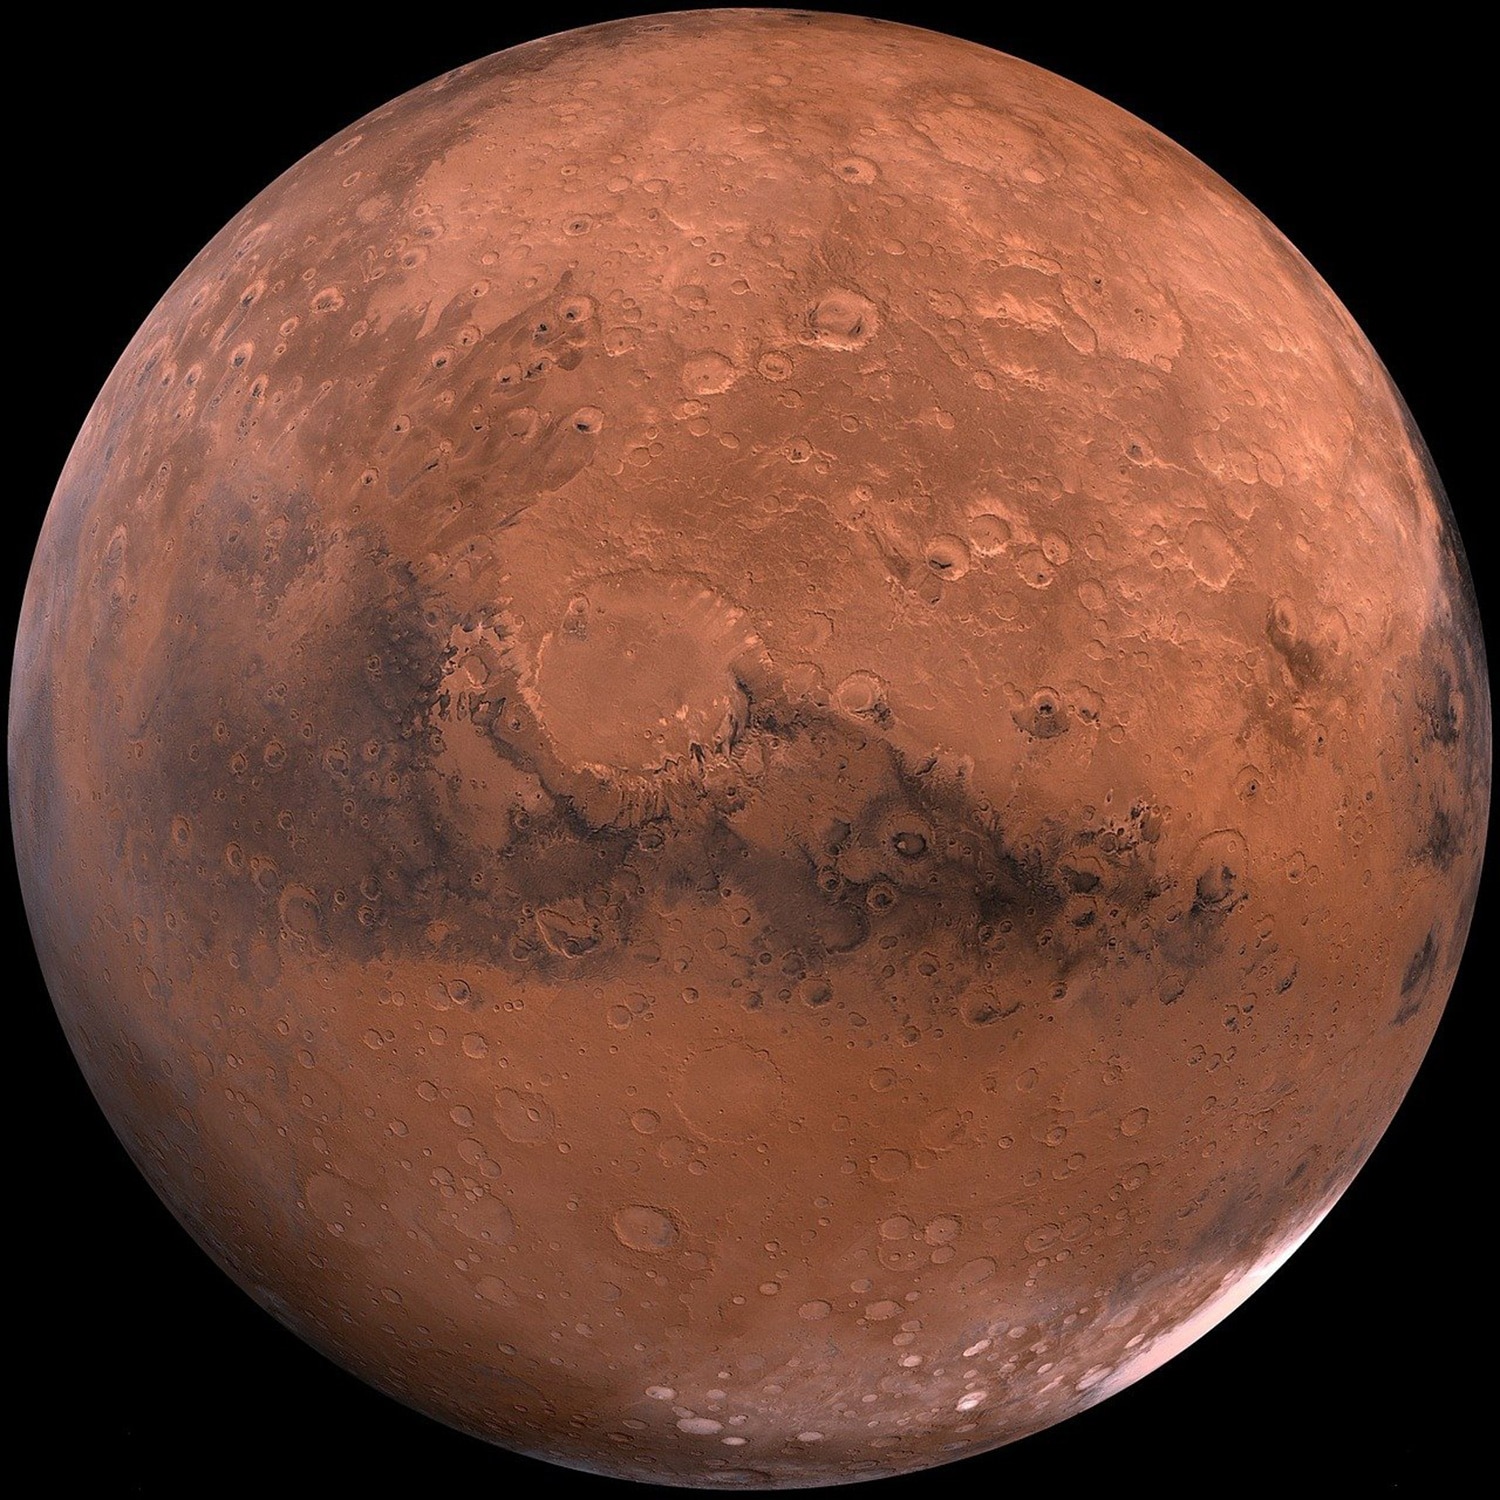 Image is the artistic impression of red planet